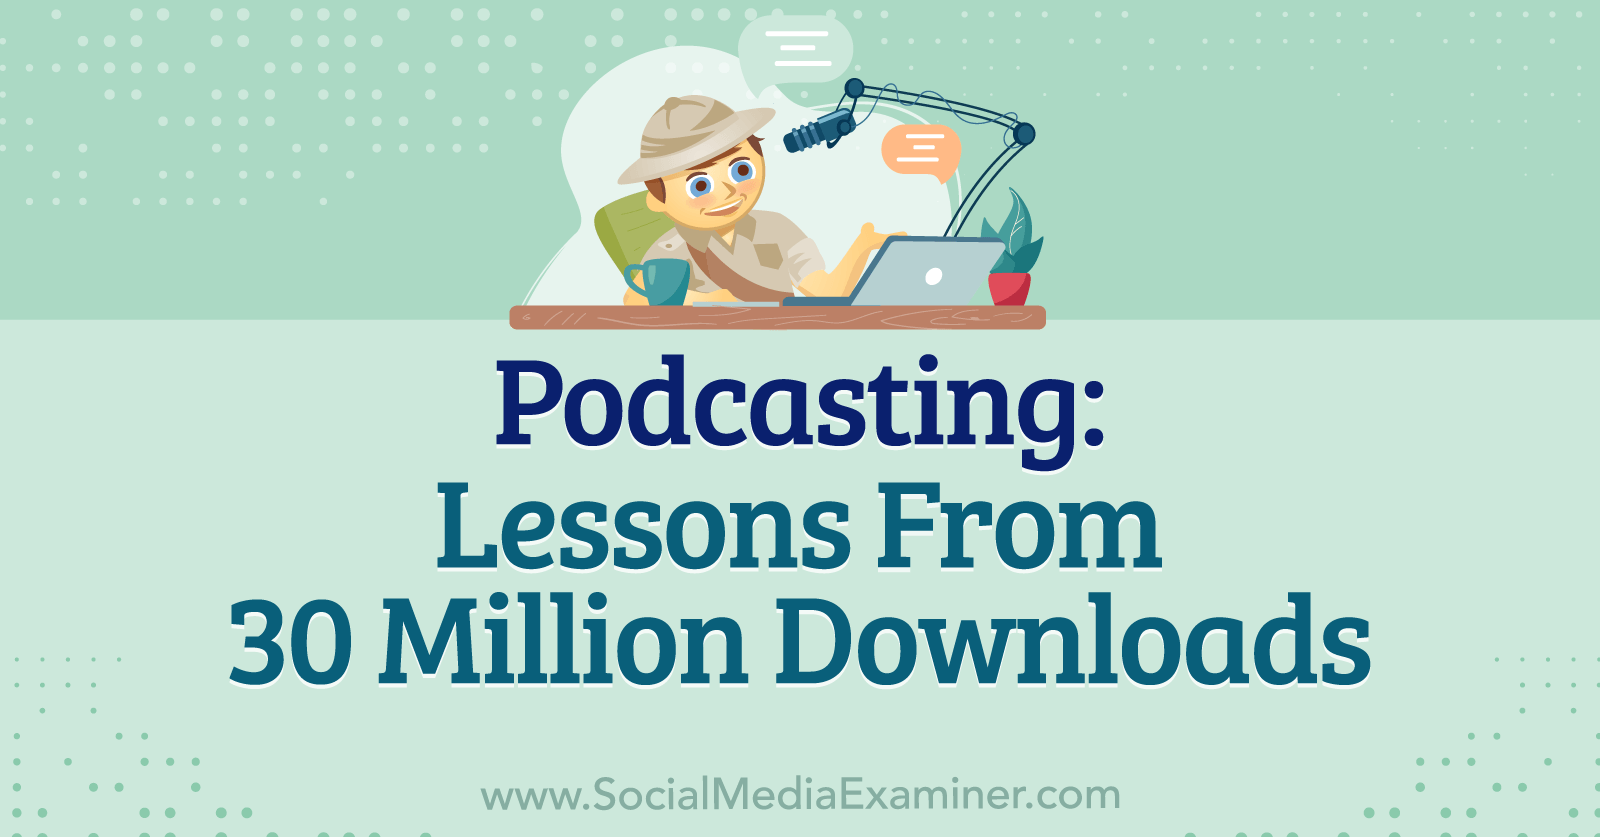 Podcasting: Lessons From 30 Million Downloads featuring insights from Michael Stelzner with interview by Leslie Samuel on the Social Media Marketing Podcast.